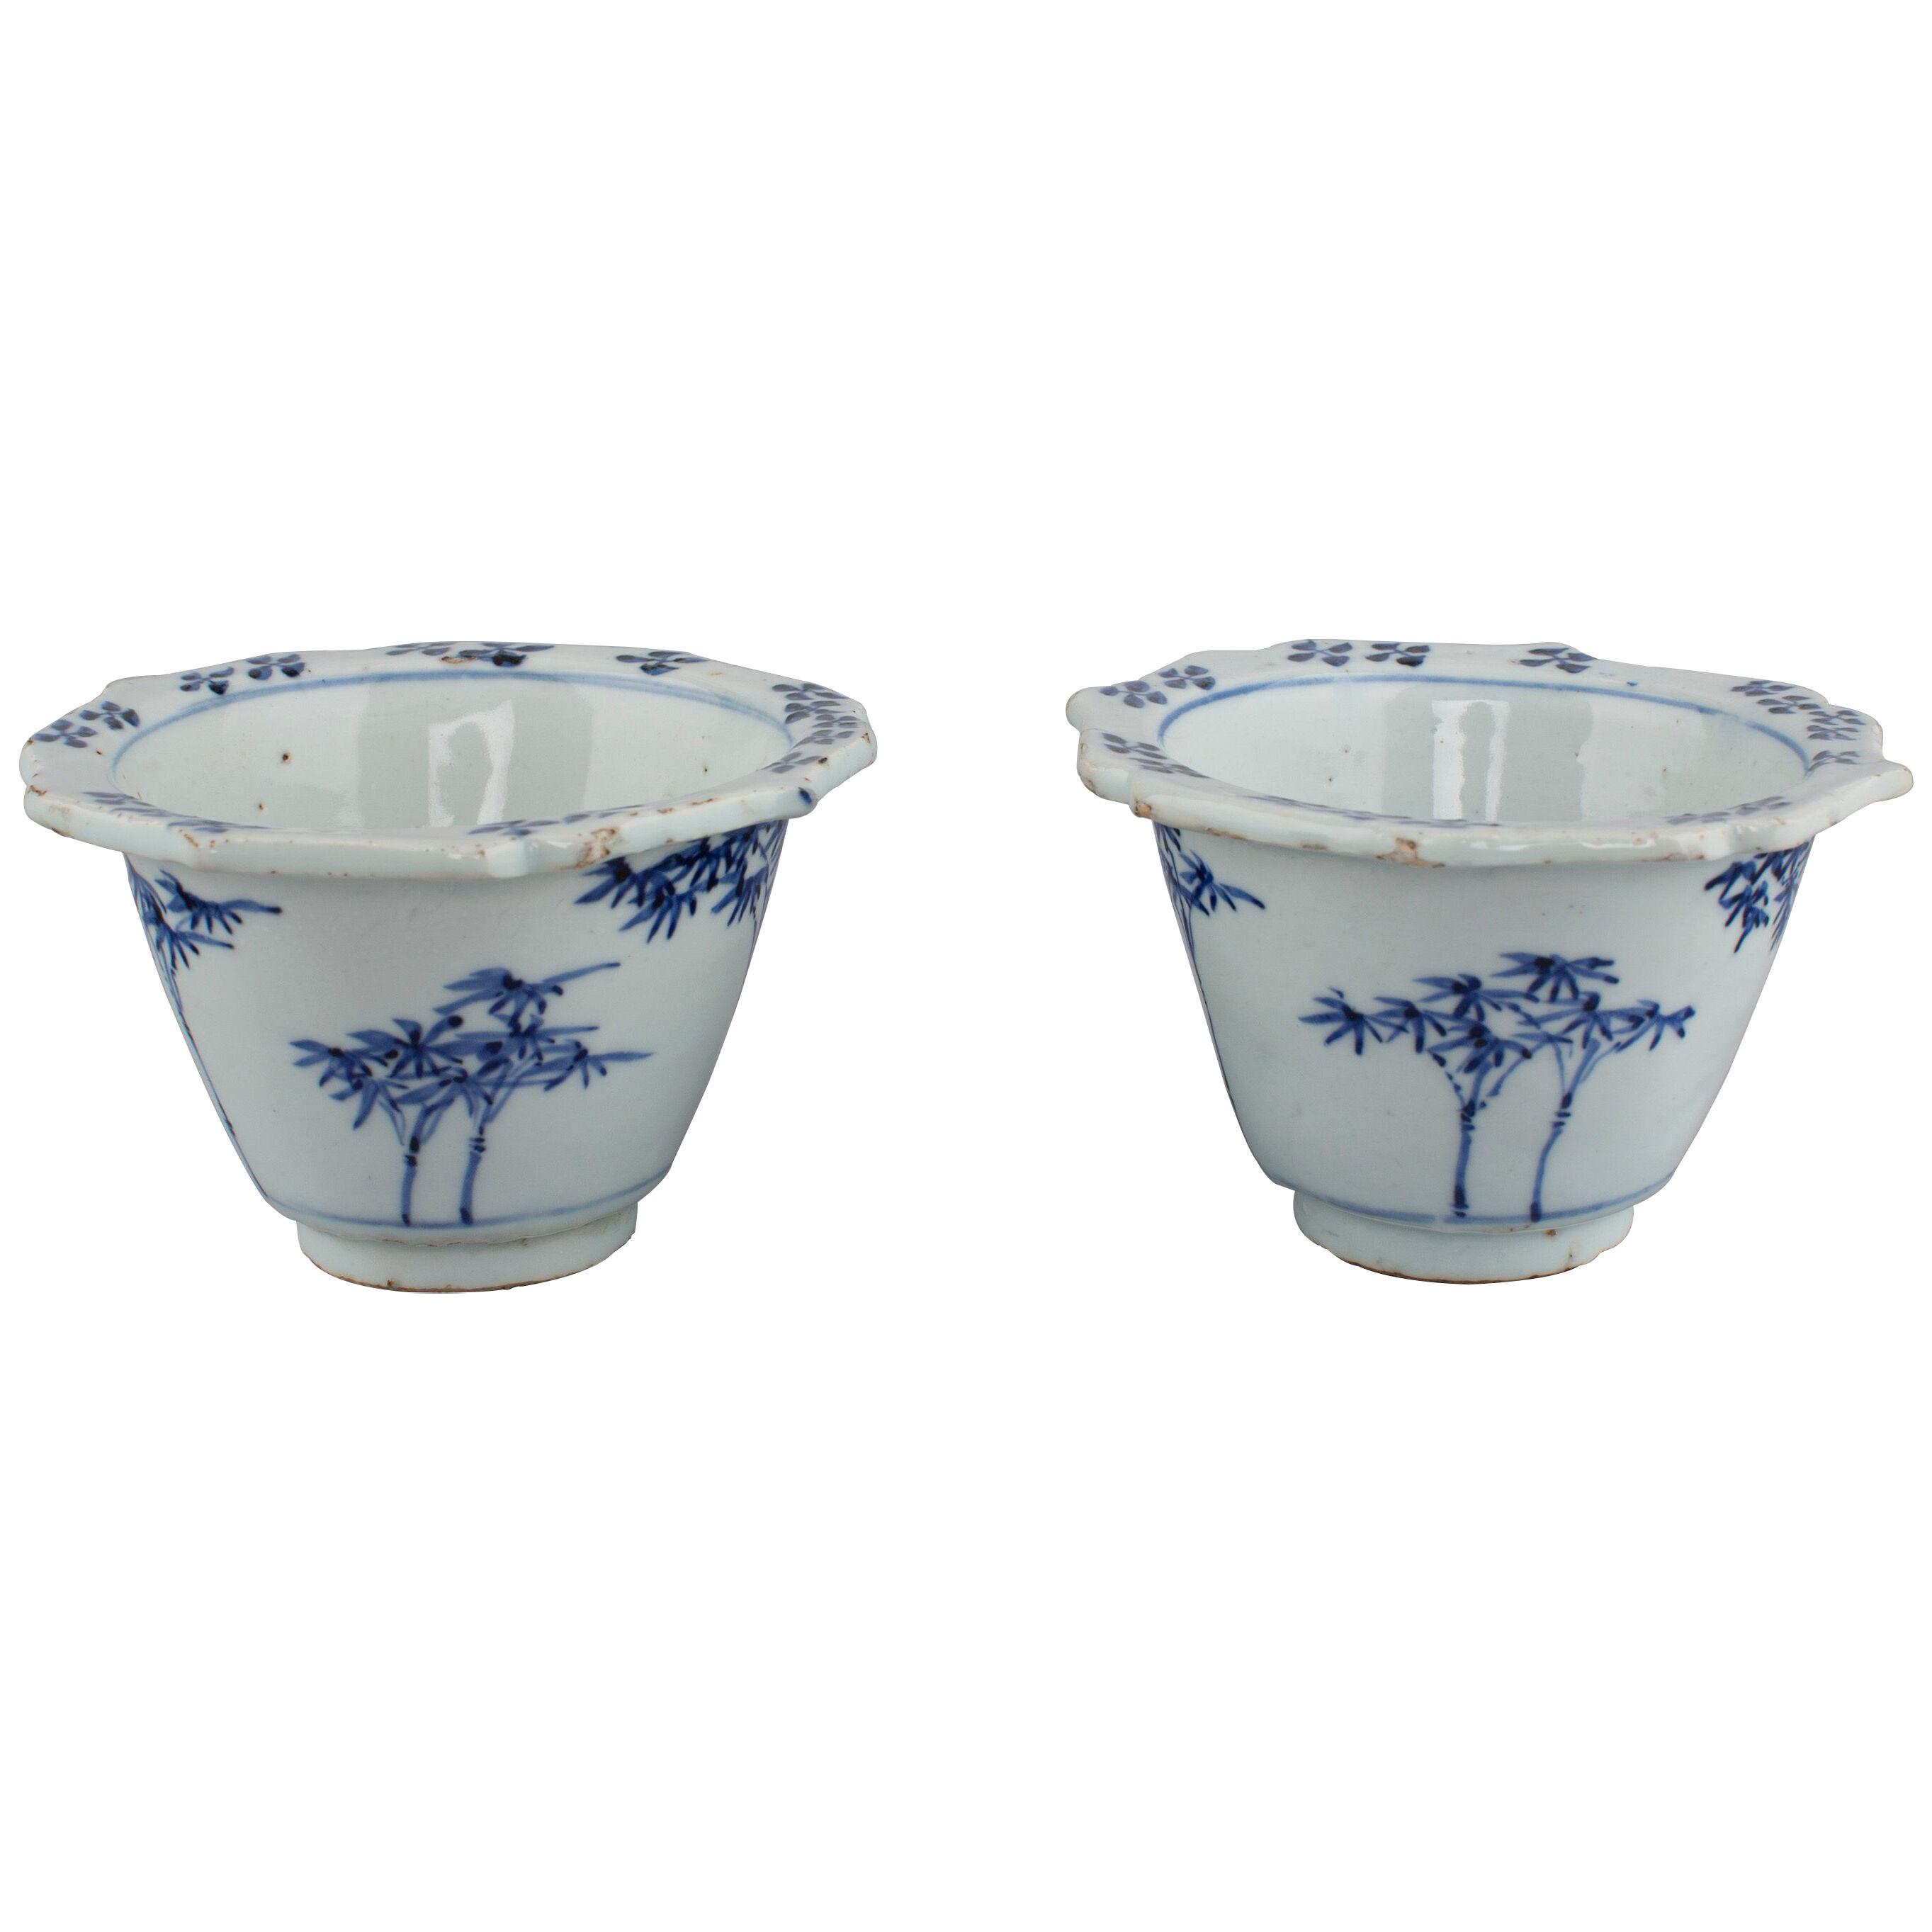 Pair of Chinese porcelain blue and white kosometsuke small food bowls